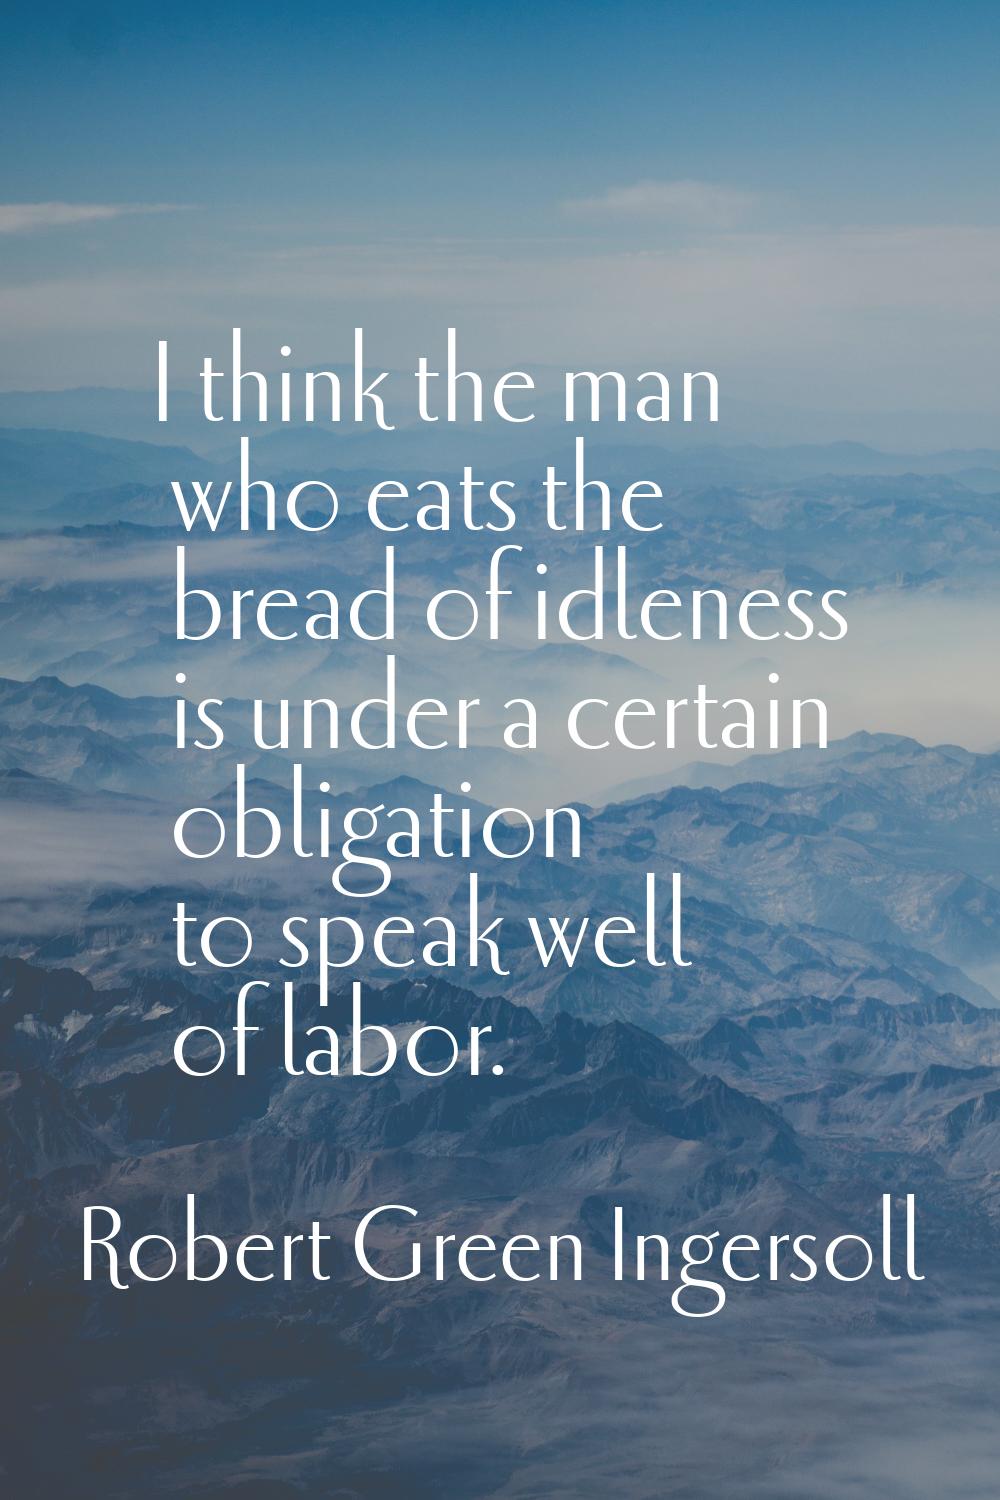 I think the man who eats the bread of idleness is under a certain obligation to speak well of labor